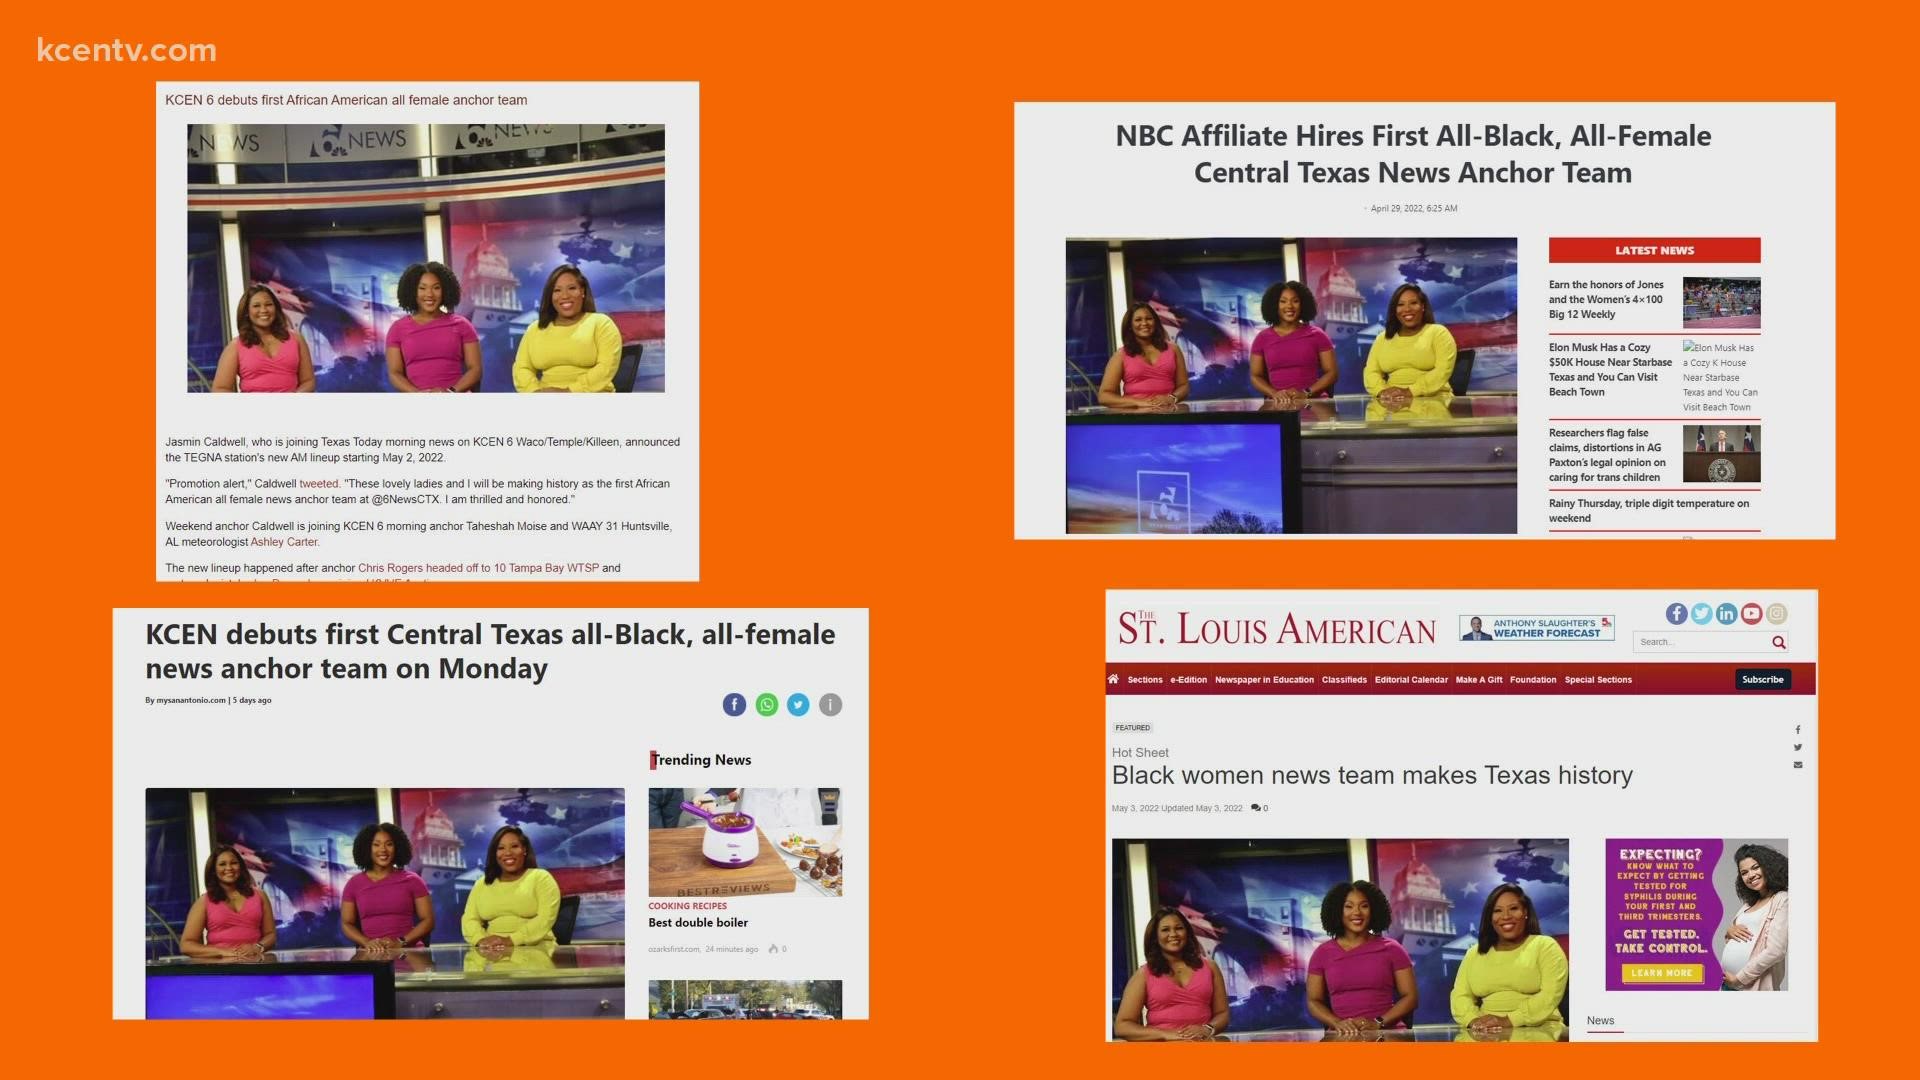 KCEN makes herstory as the first all-female black news anchor team in Central Texas.